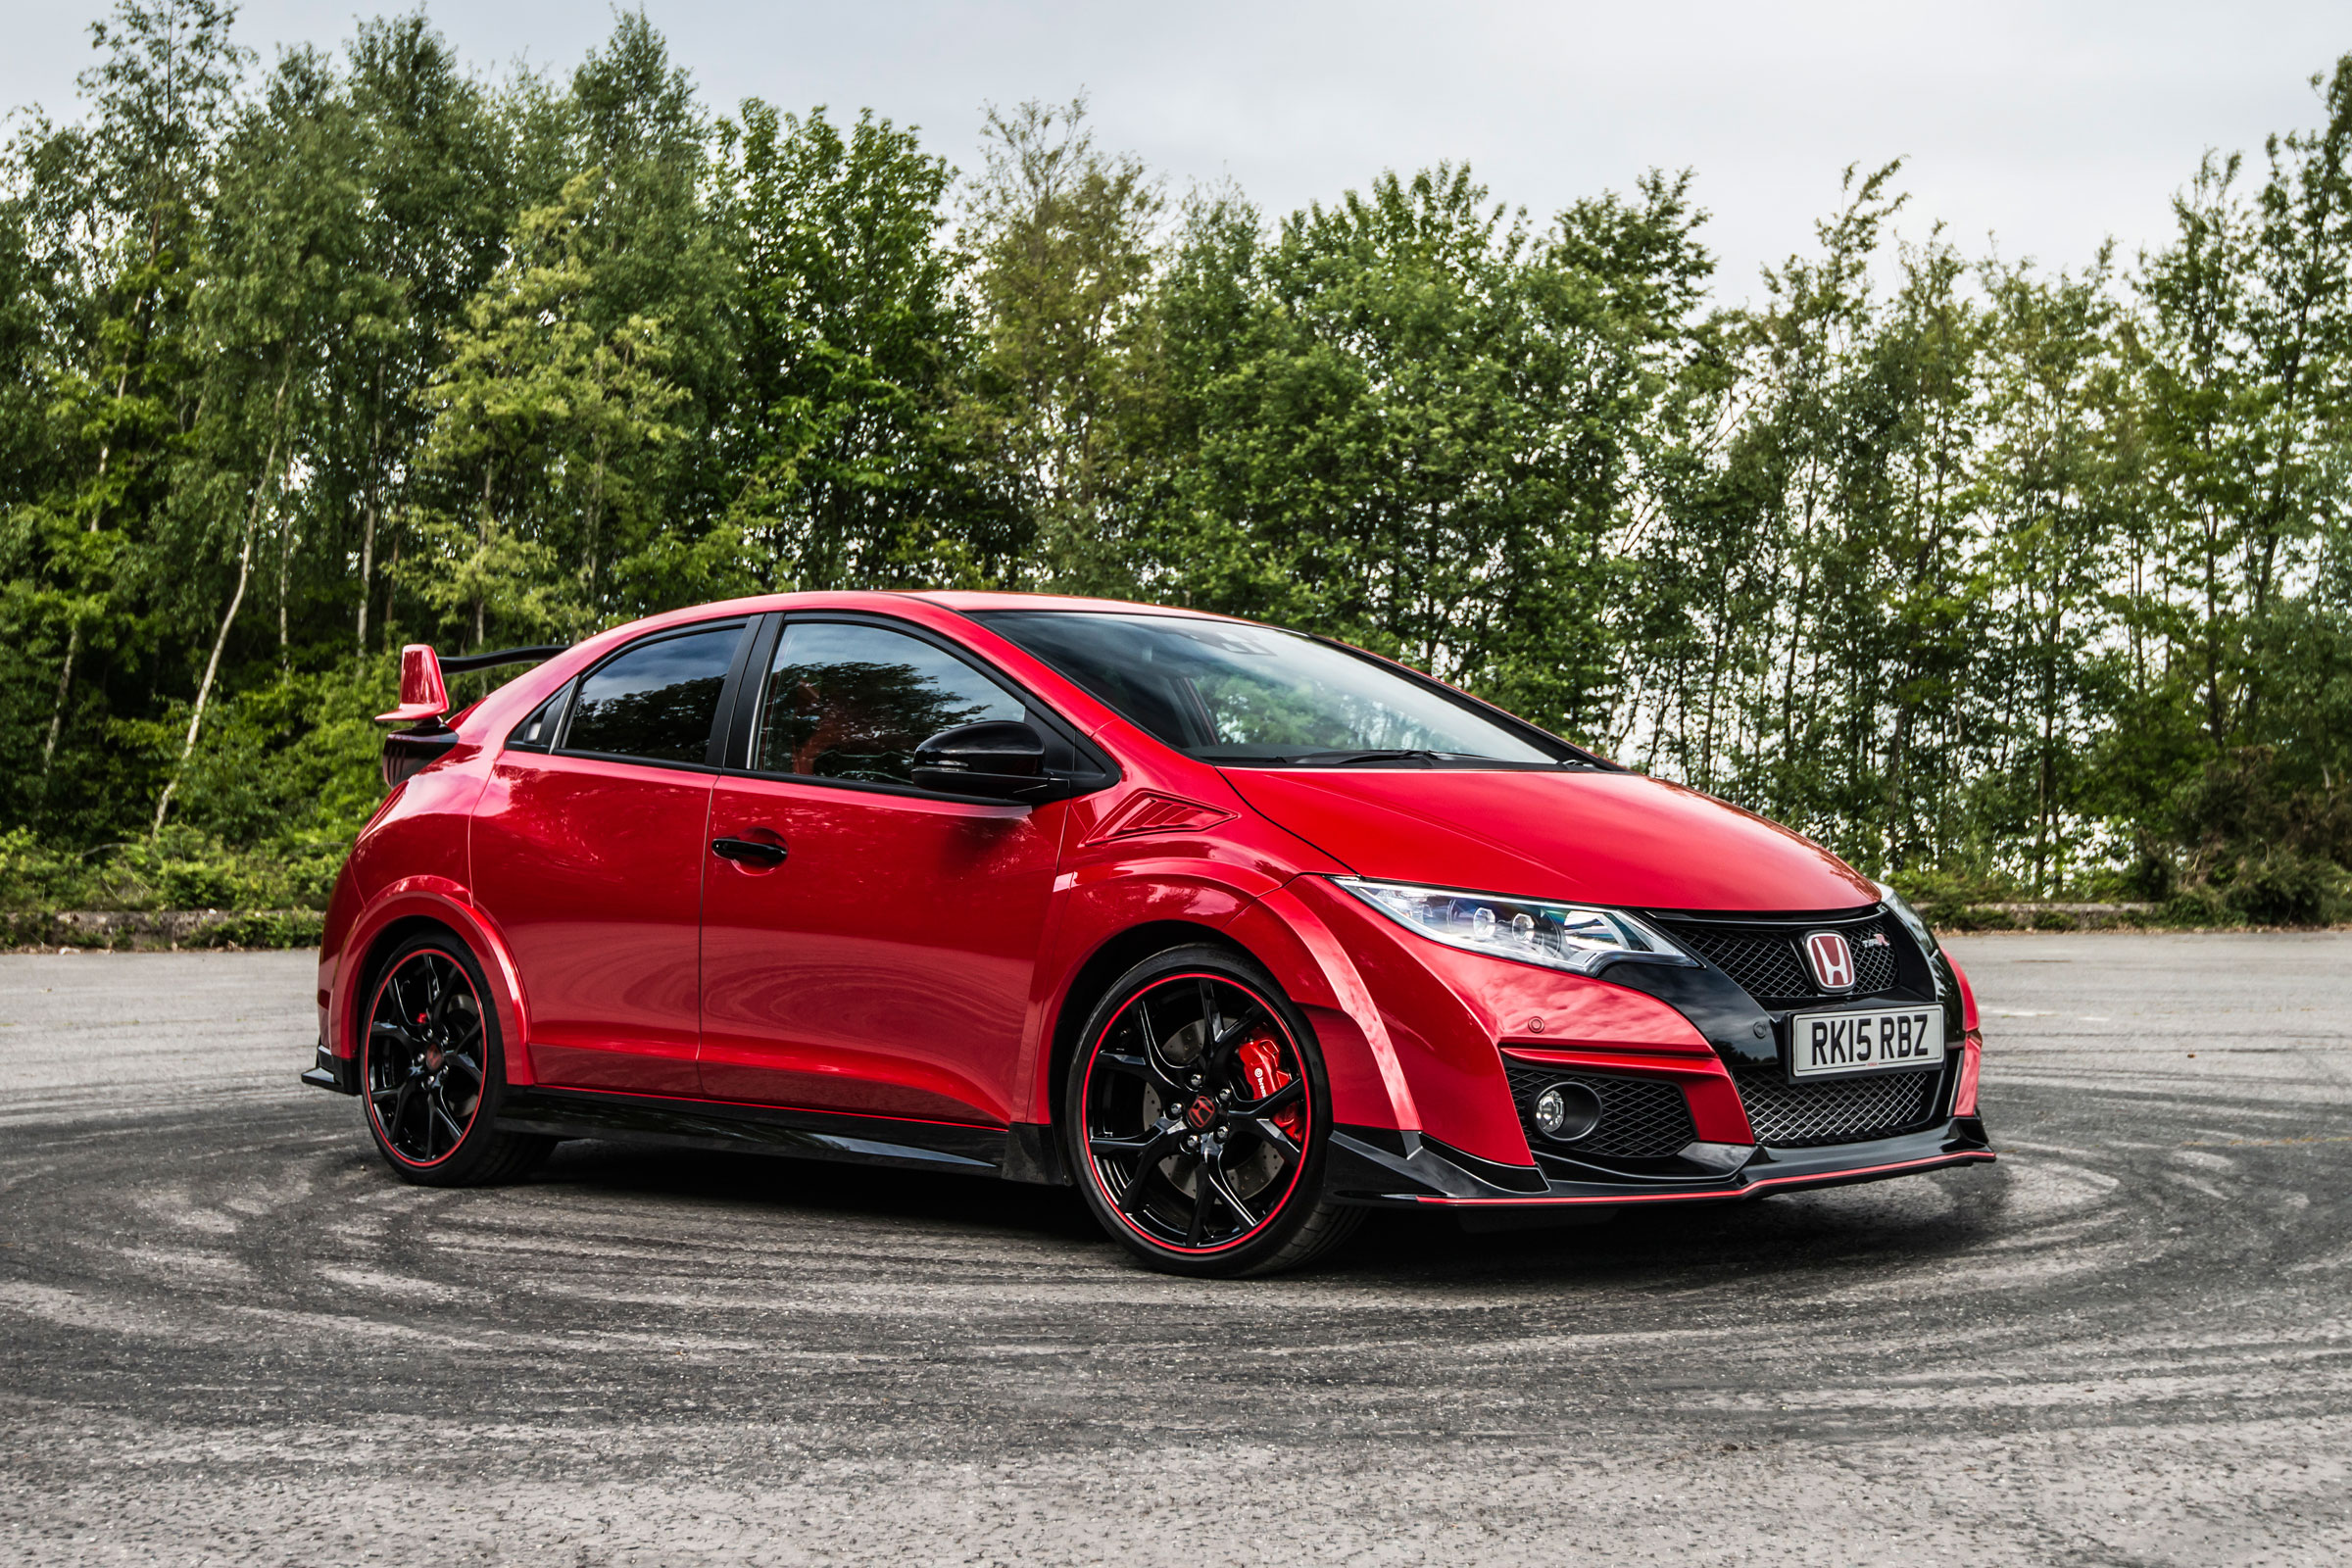 New Honda Civic Type R price, specs, release date Carbuyer